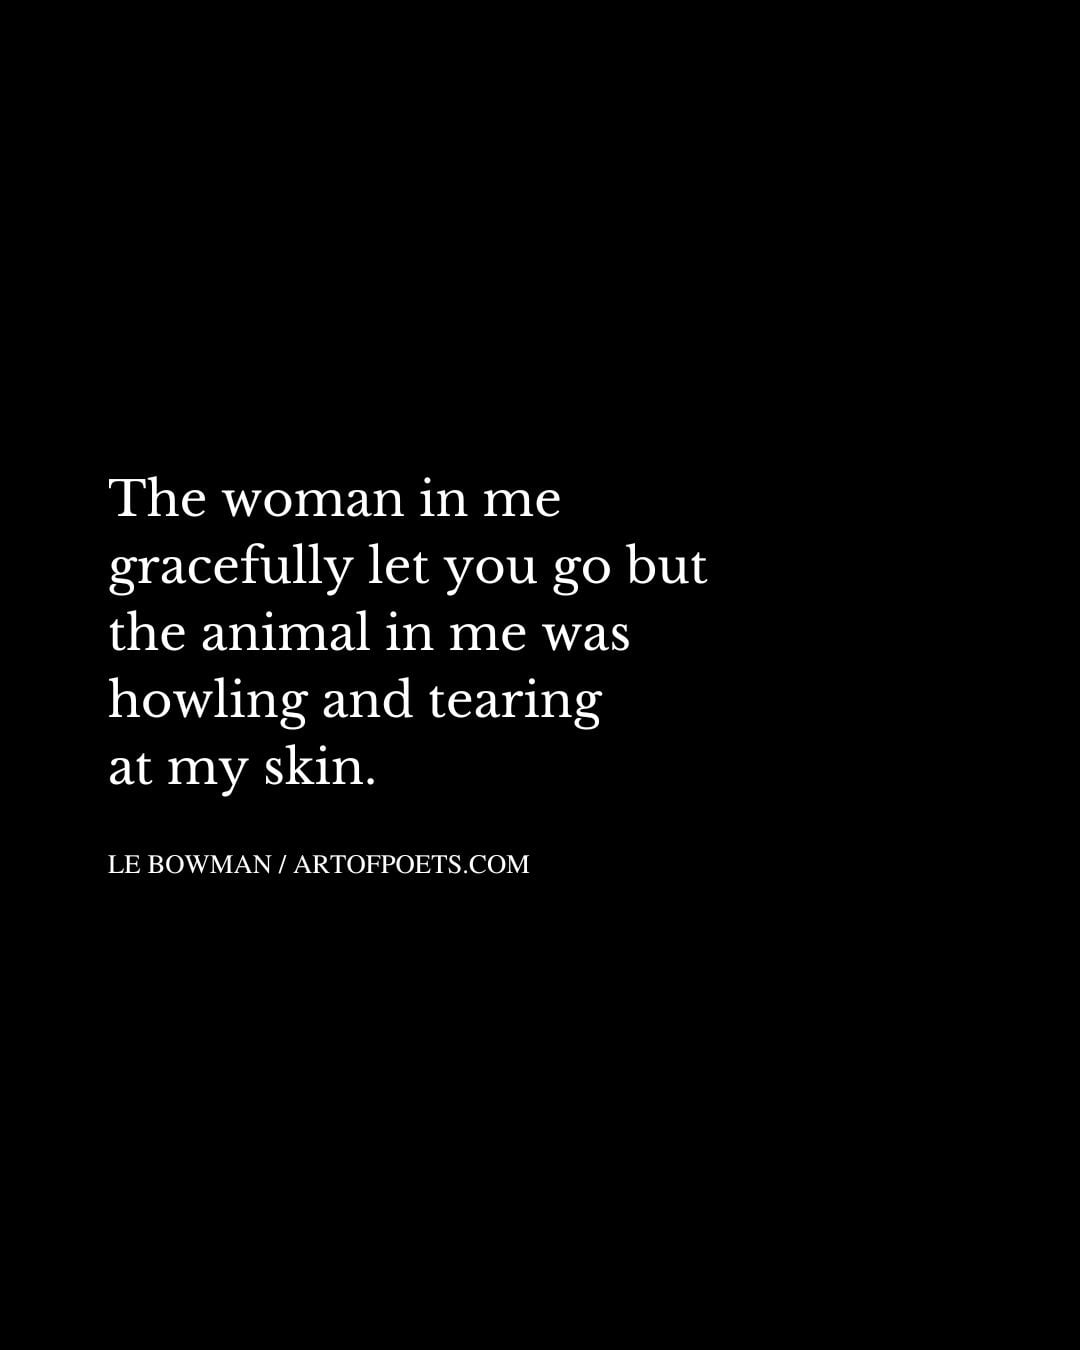 The woman in me gracefully let you go but the animal in me was howling and tearing at my skin